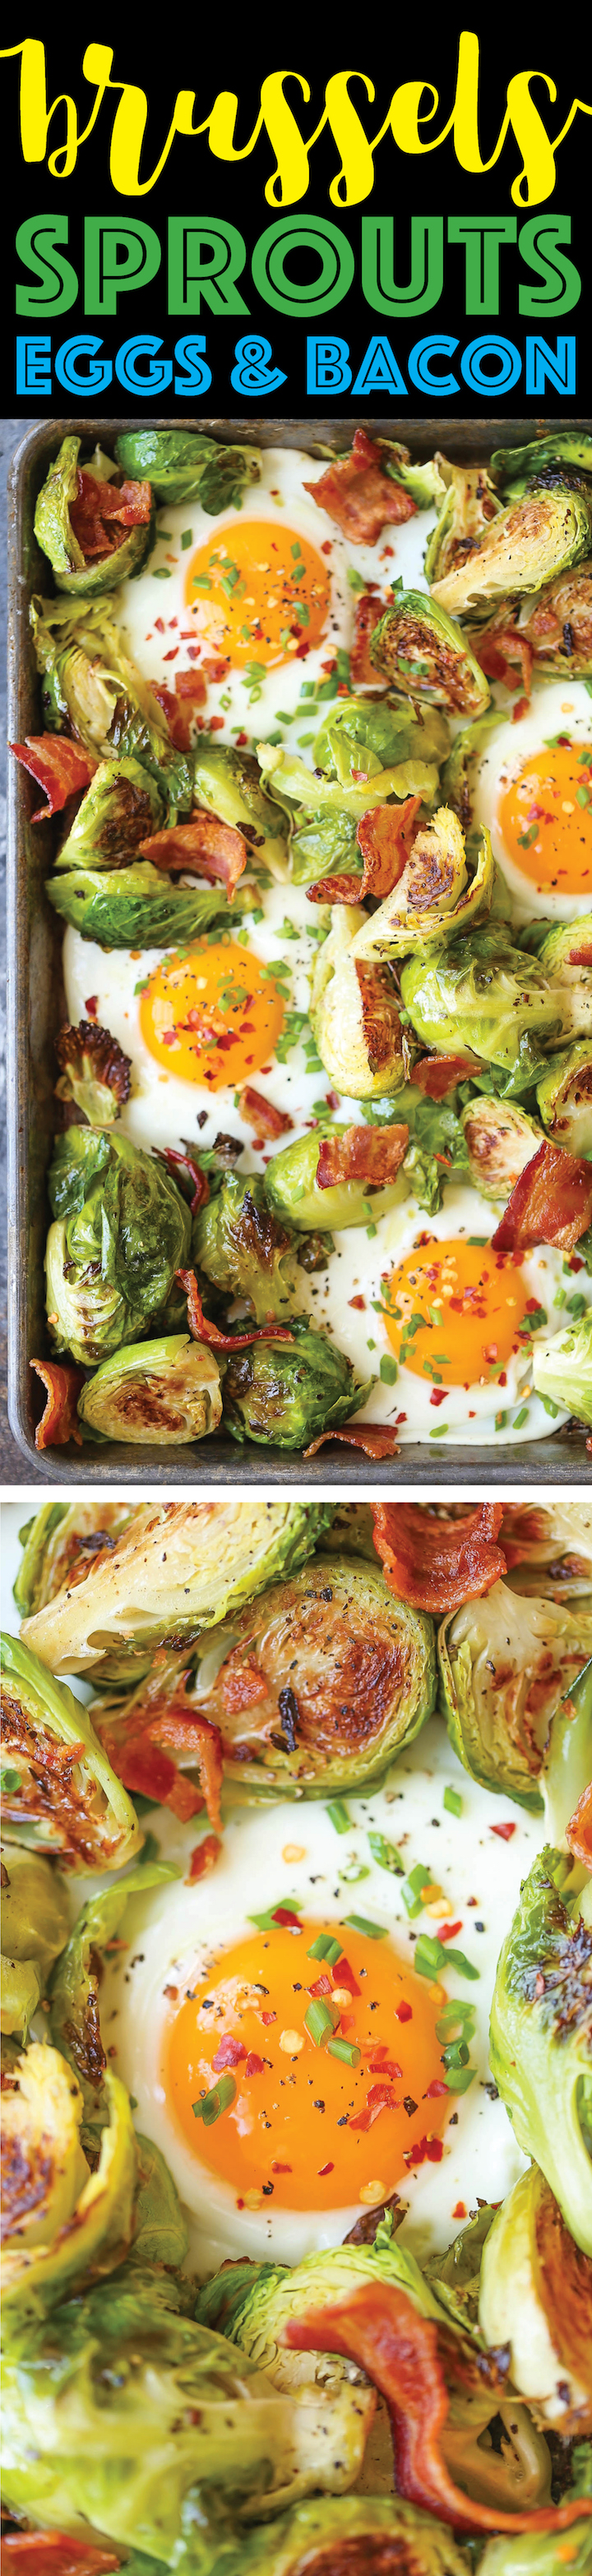 Brussels Sprouts, Eggs and Bacon - A complete sheet pan breakfast with eggs, crisp bacon and roasted brussels sprouts! Quick/easy with one pan to clean!